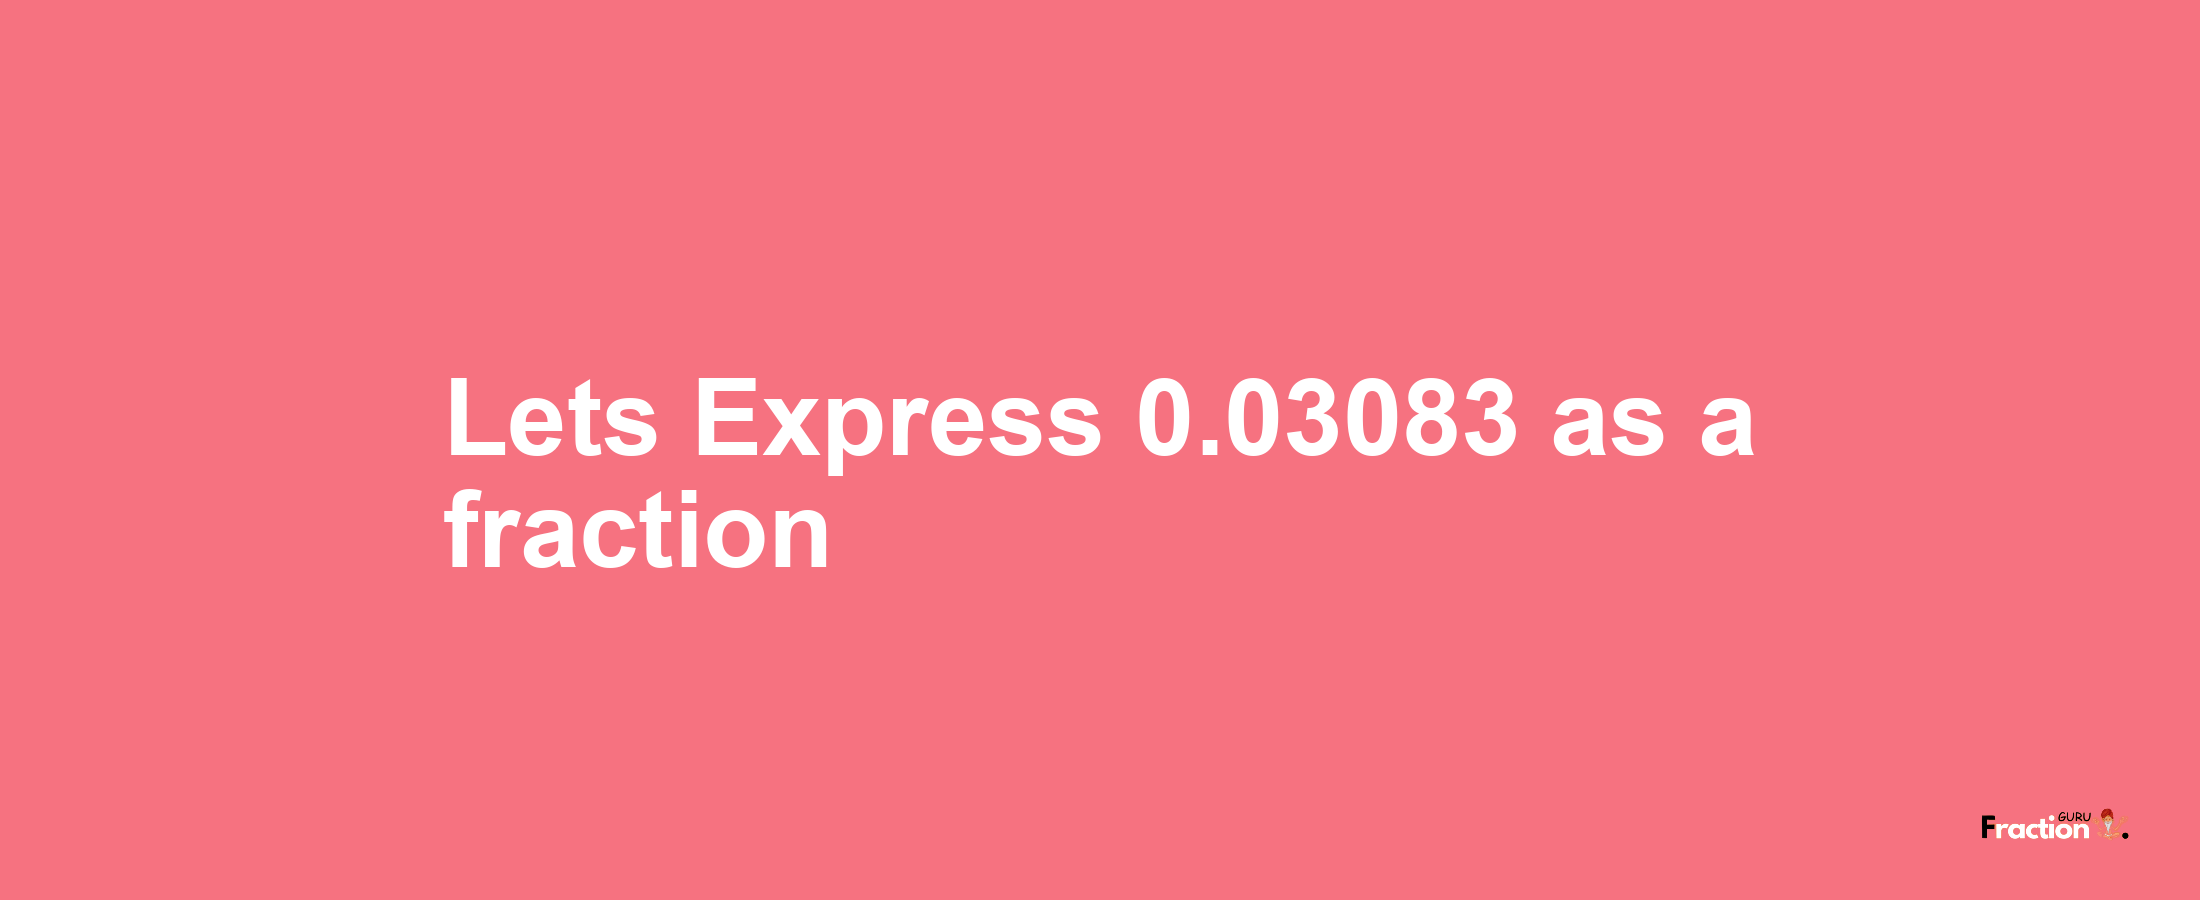 Lets Express 0.03083 as afraction